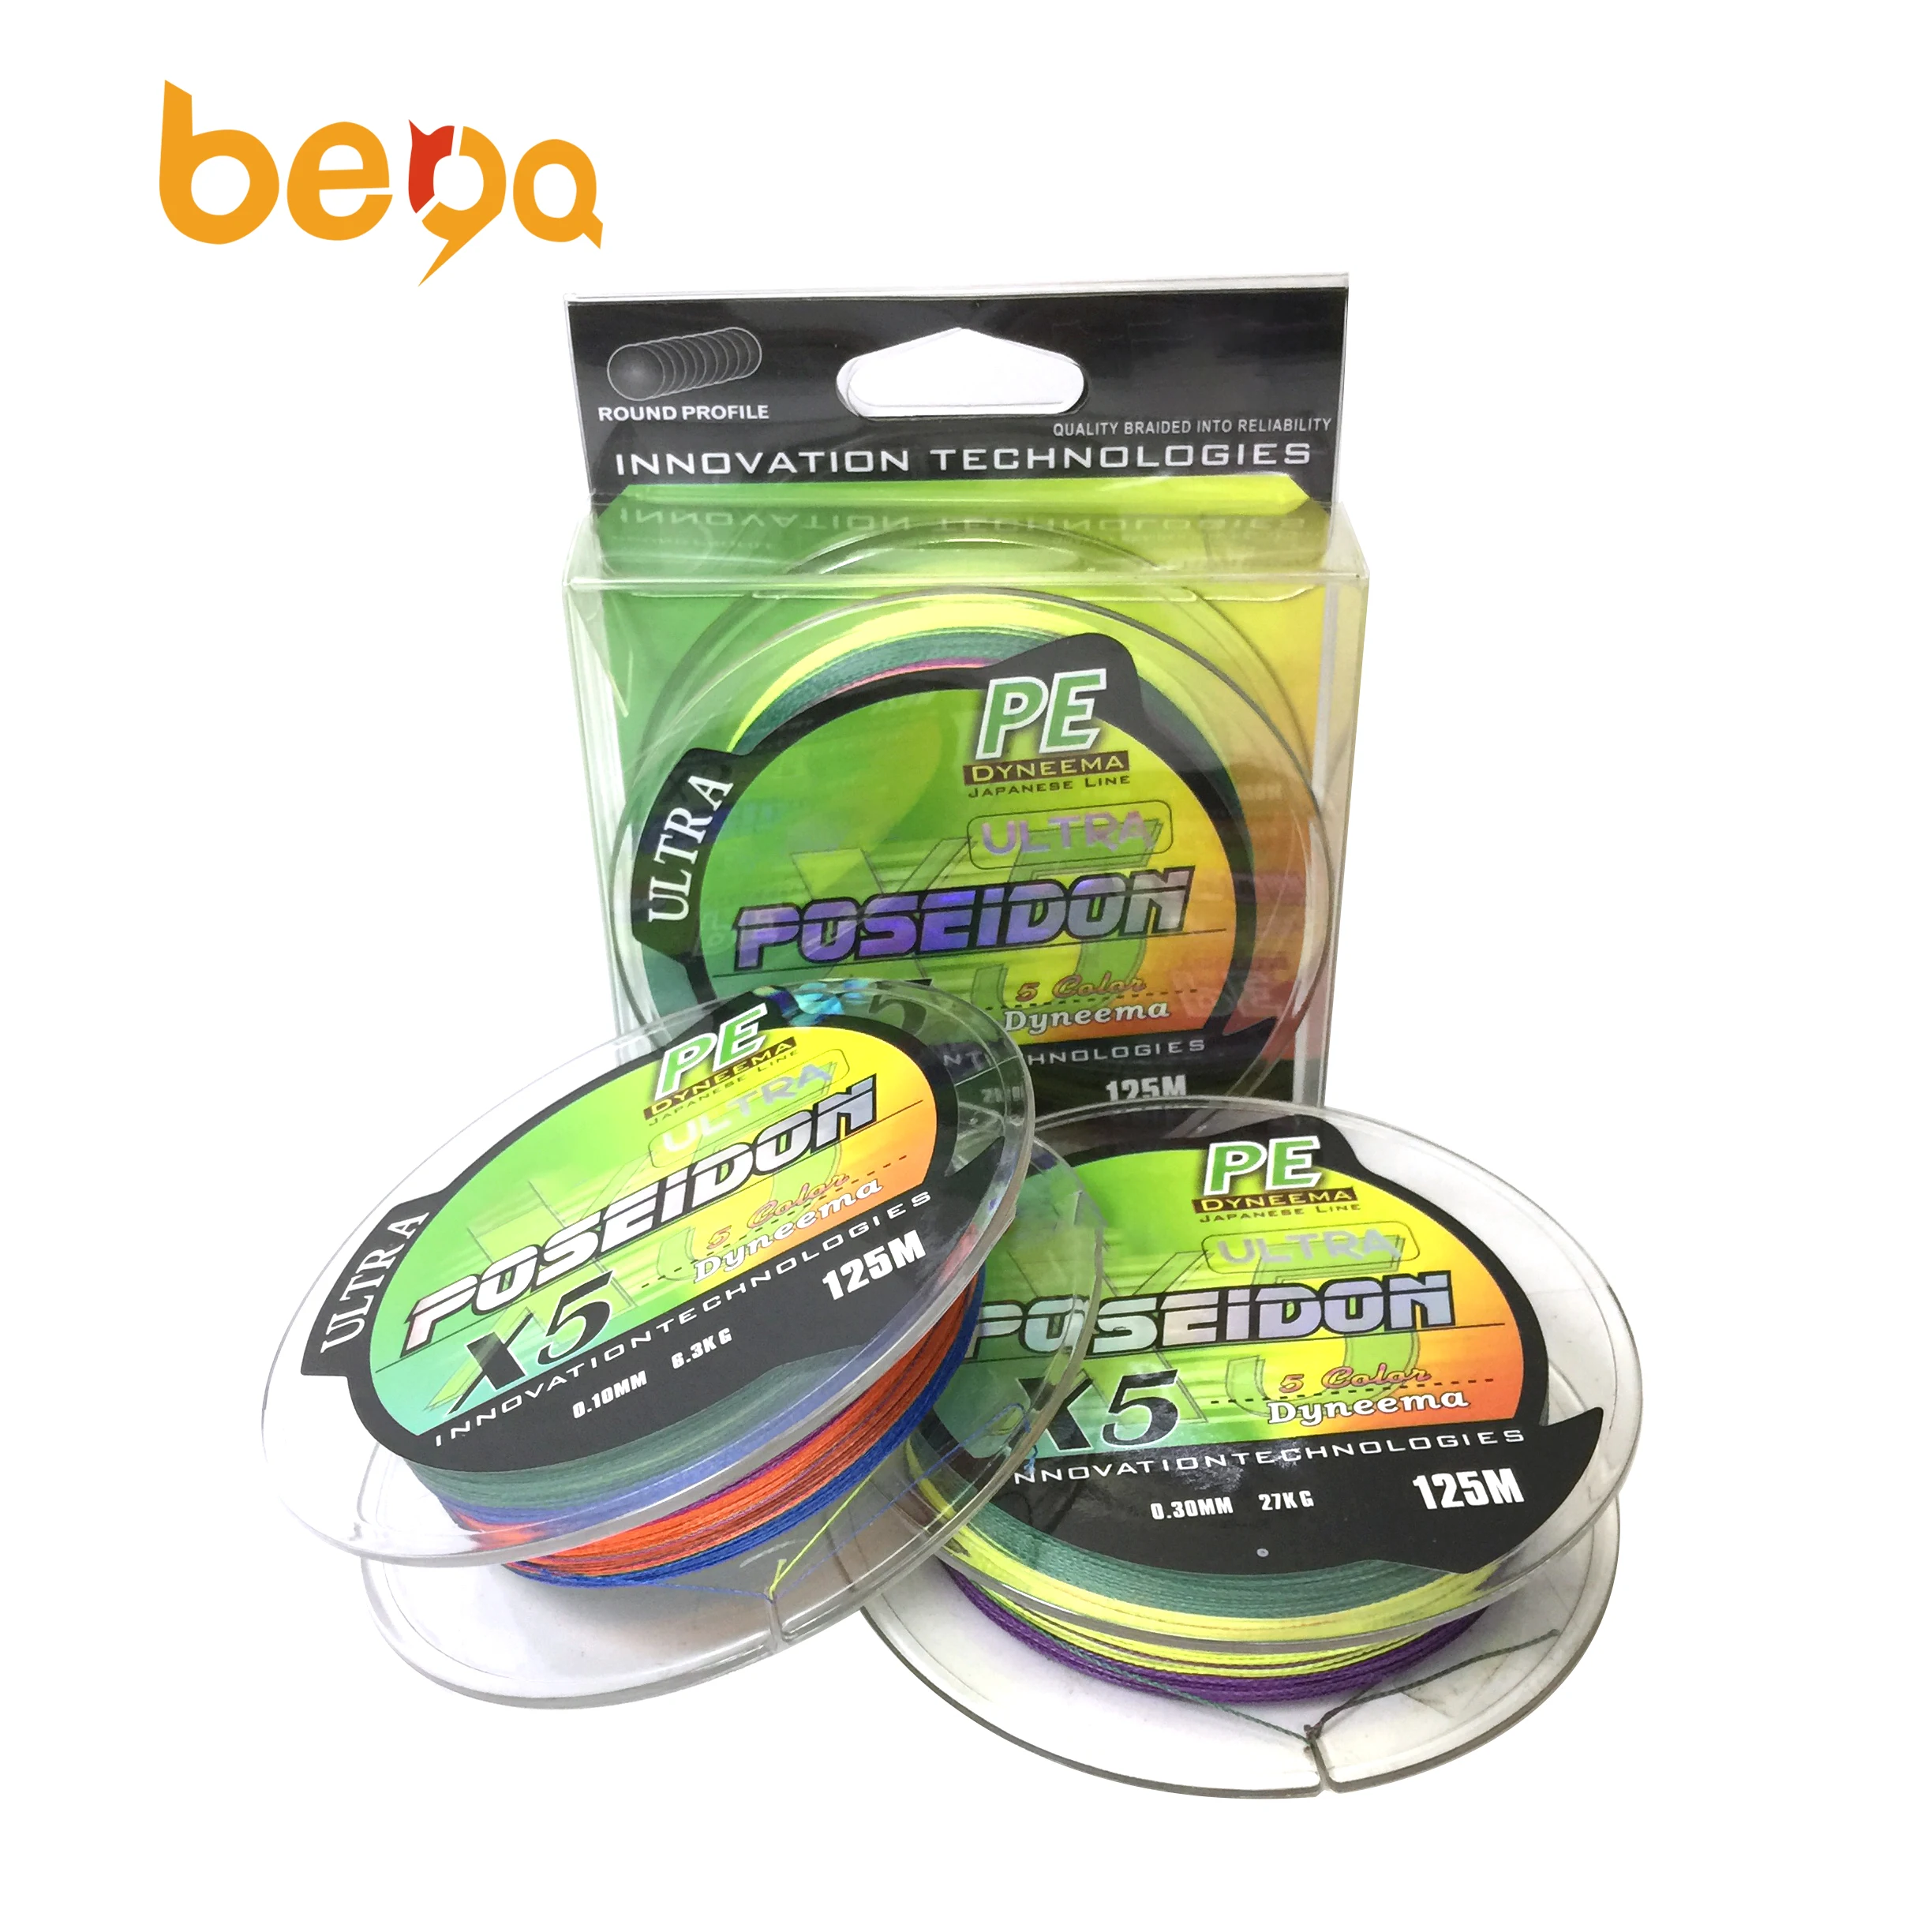 

Special Price multifilament 4strands and 5strands braided PE Fishing Line 100M Super Strong, Polychrome , customizable